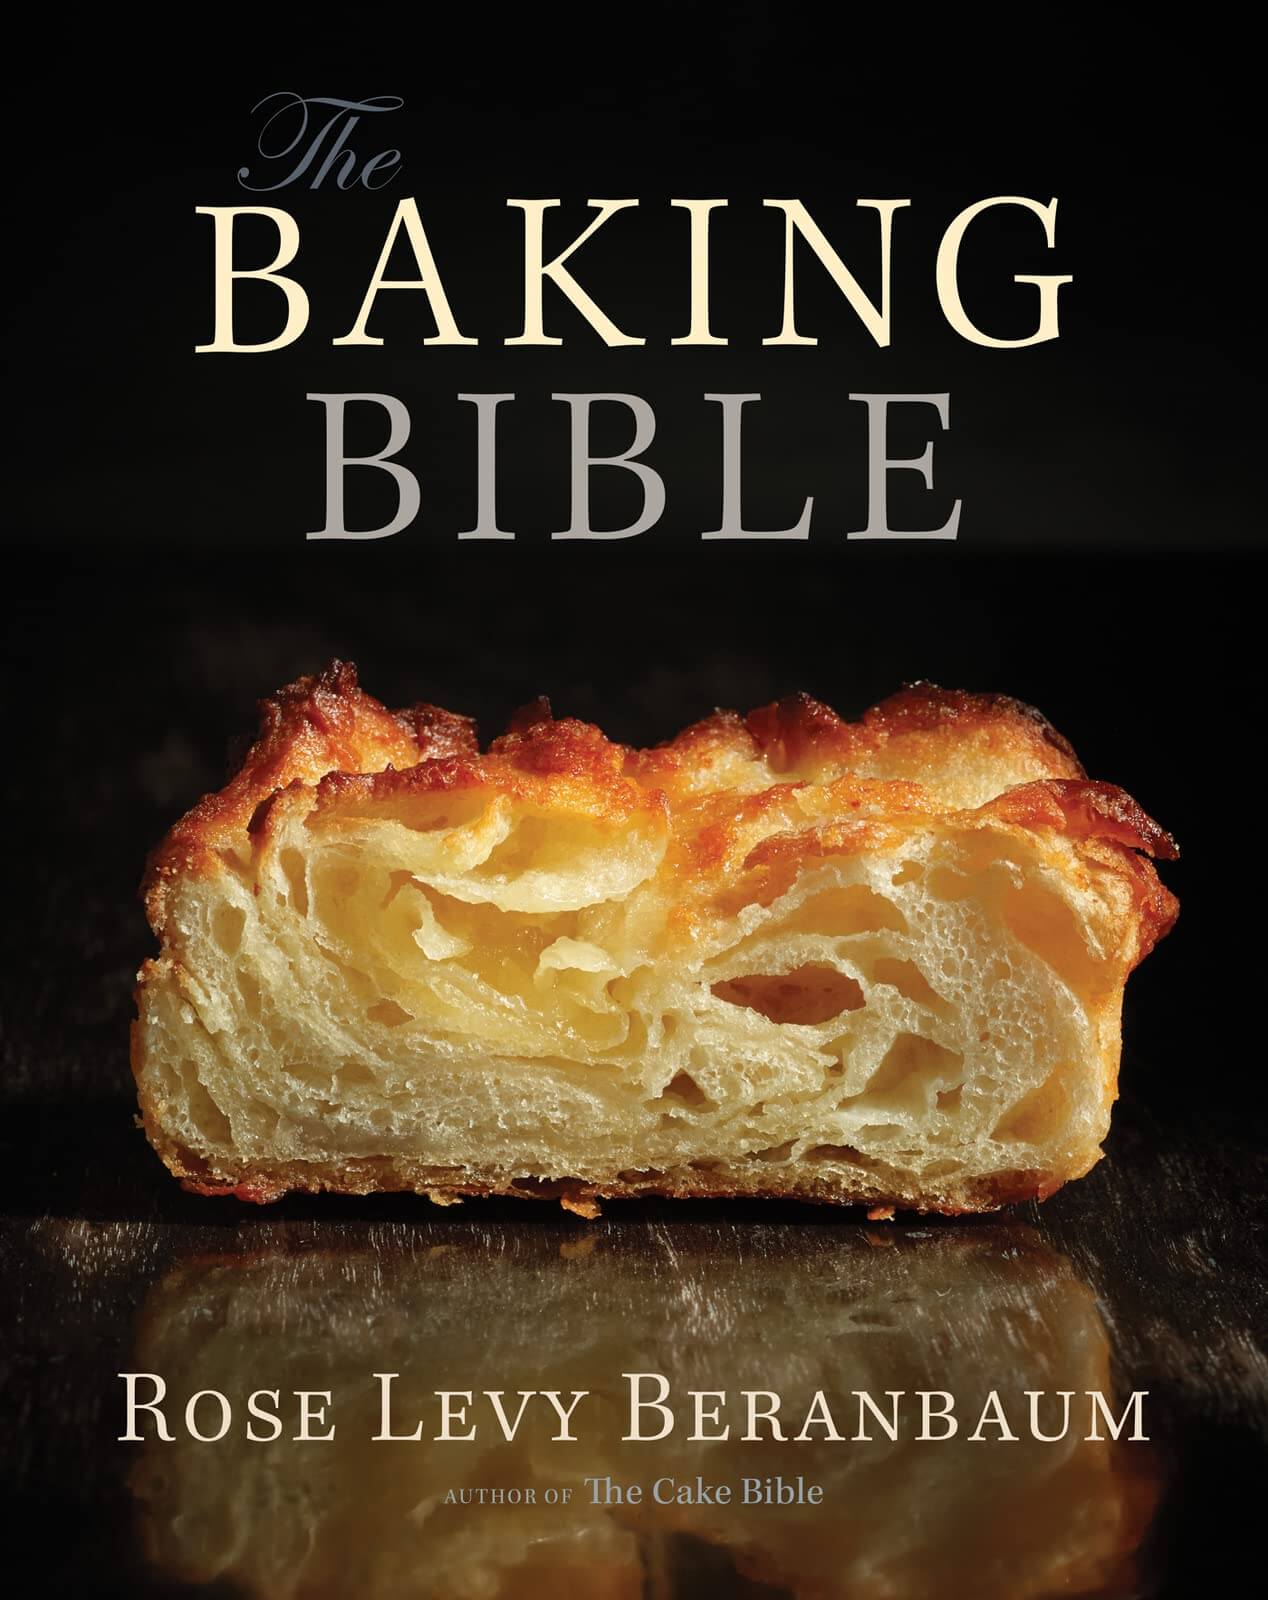 "The Baking Bible" by Rose Levy Beranbaum